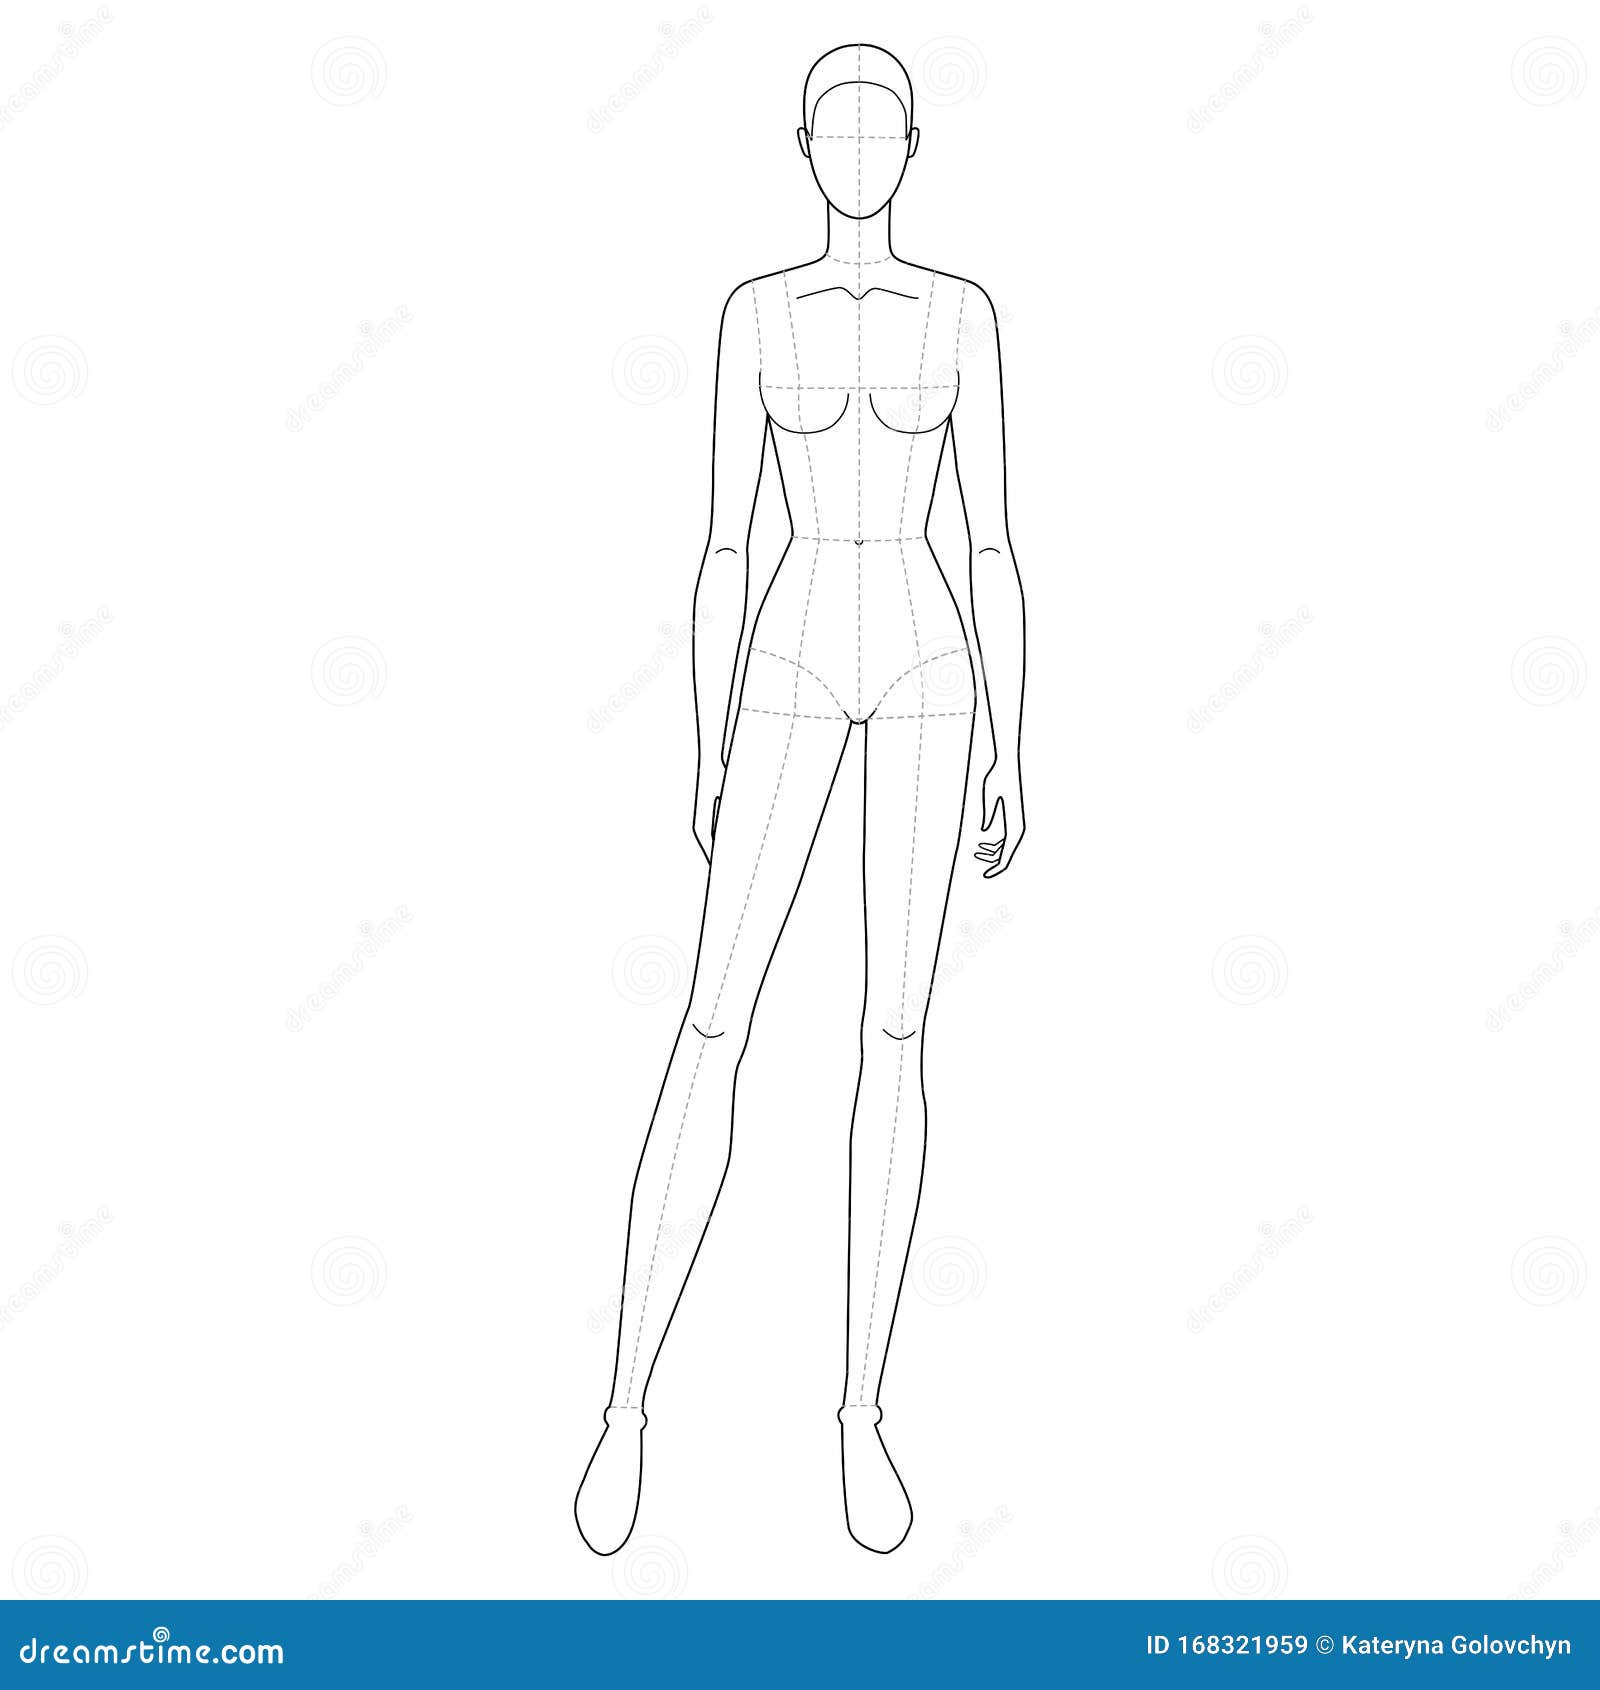 Female Body Drawing Outline Of A Person - pic-isto